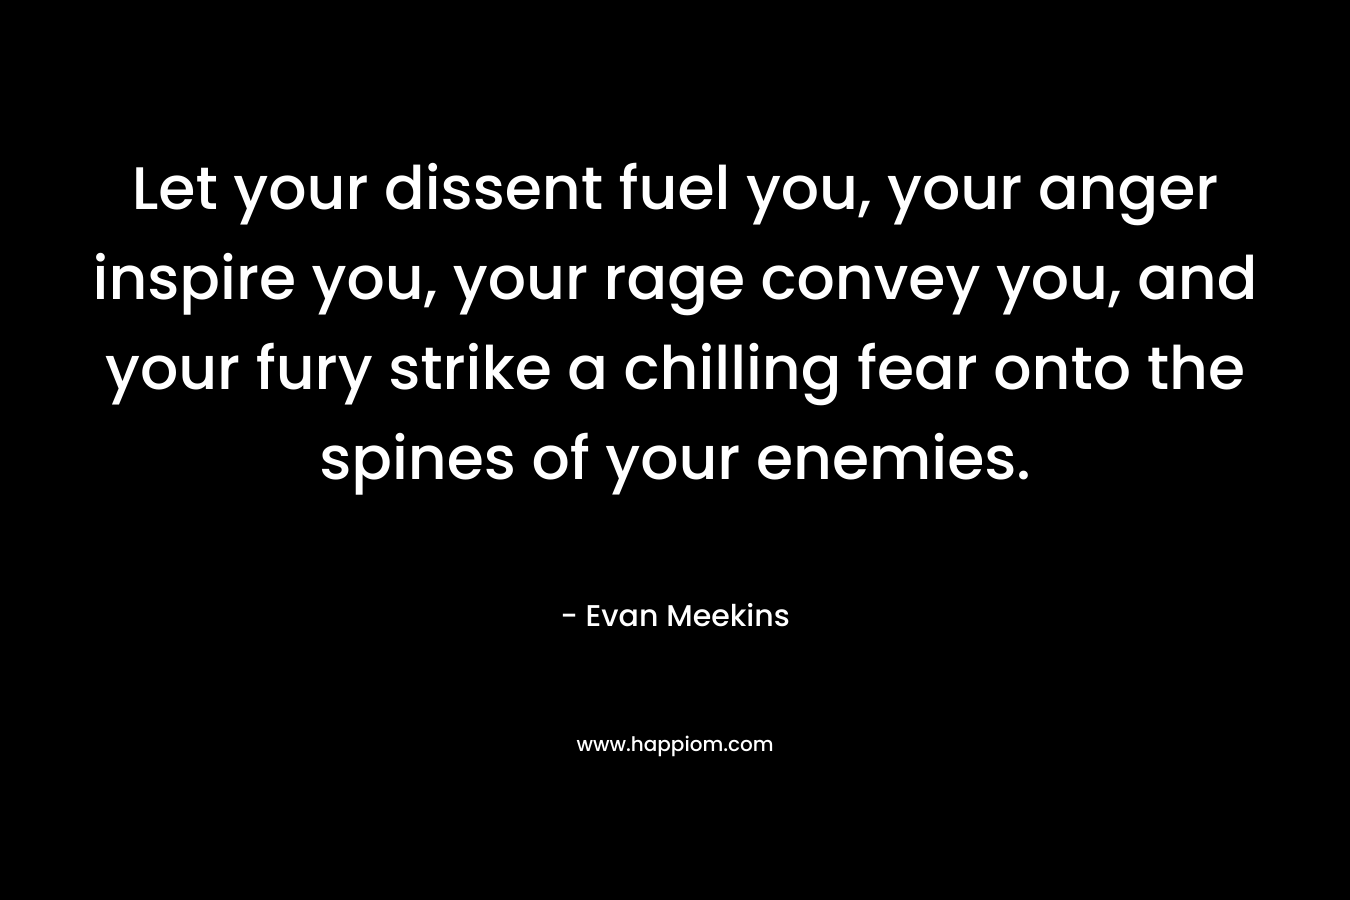 Let your dissent fuel you, your anger inspire you, your rage convey you, and your fury strike a chilling fear onto the spines of your enemies.